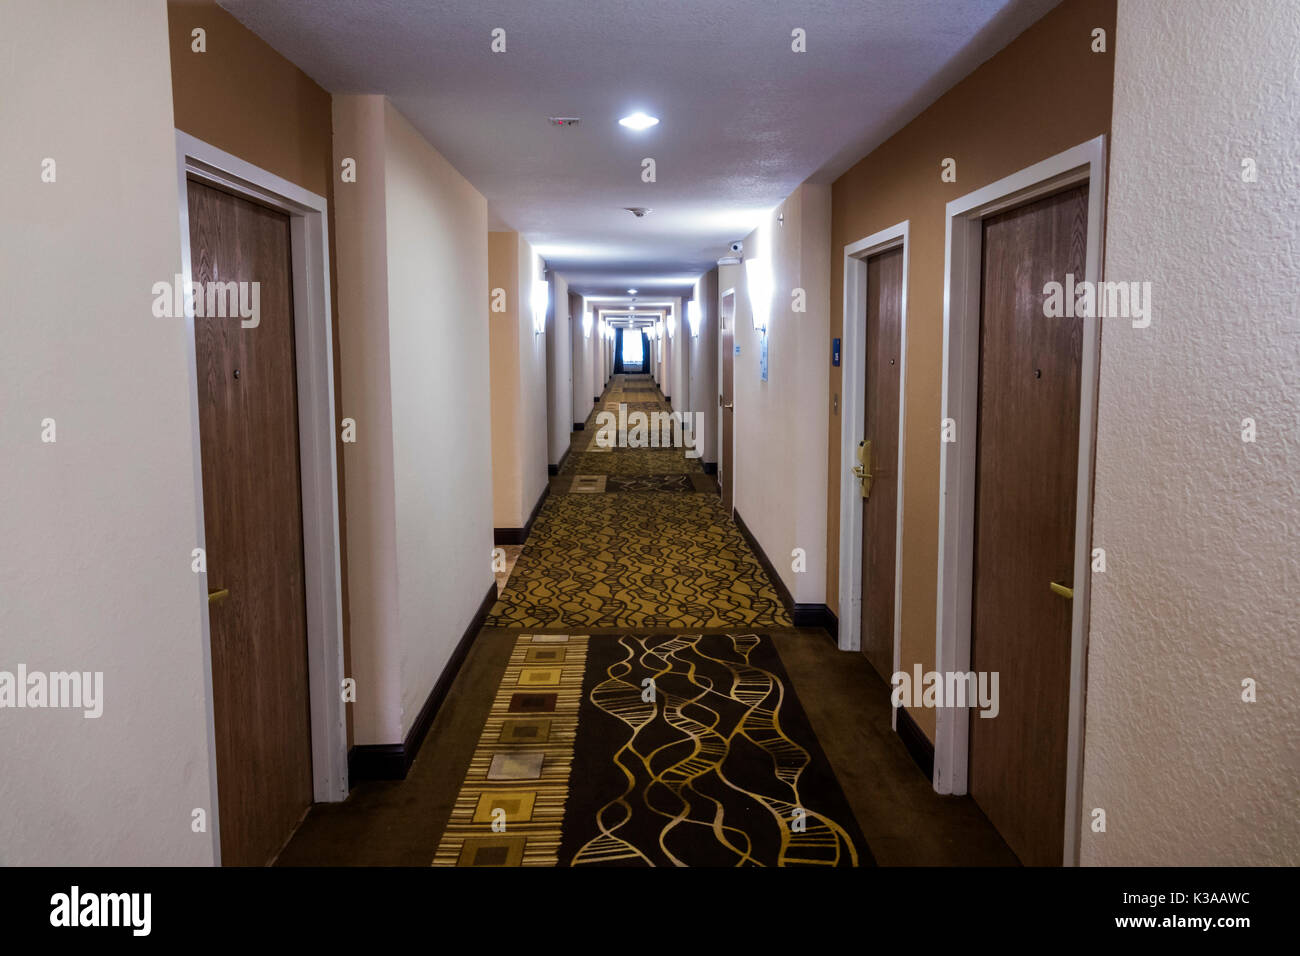 Florida,Palm Coast,Holiday Inn Express,hotel hotels lodging inn motel motels,guest rooms,hallway,hall,doors,visitors travel traveling tour tourist tou Stock Photo